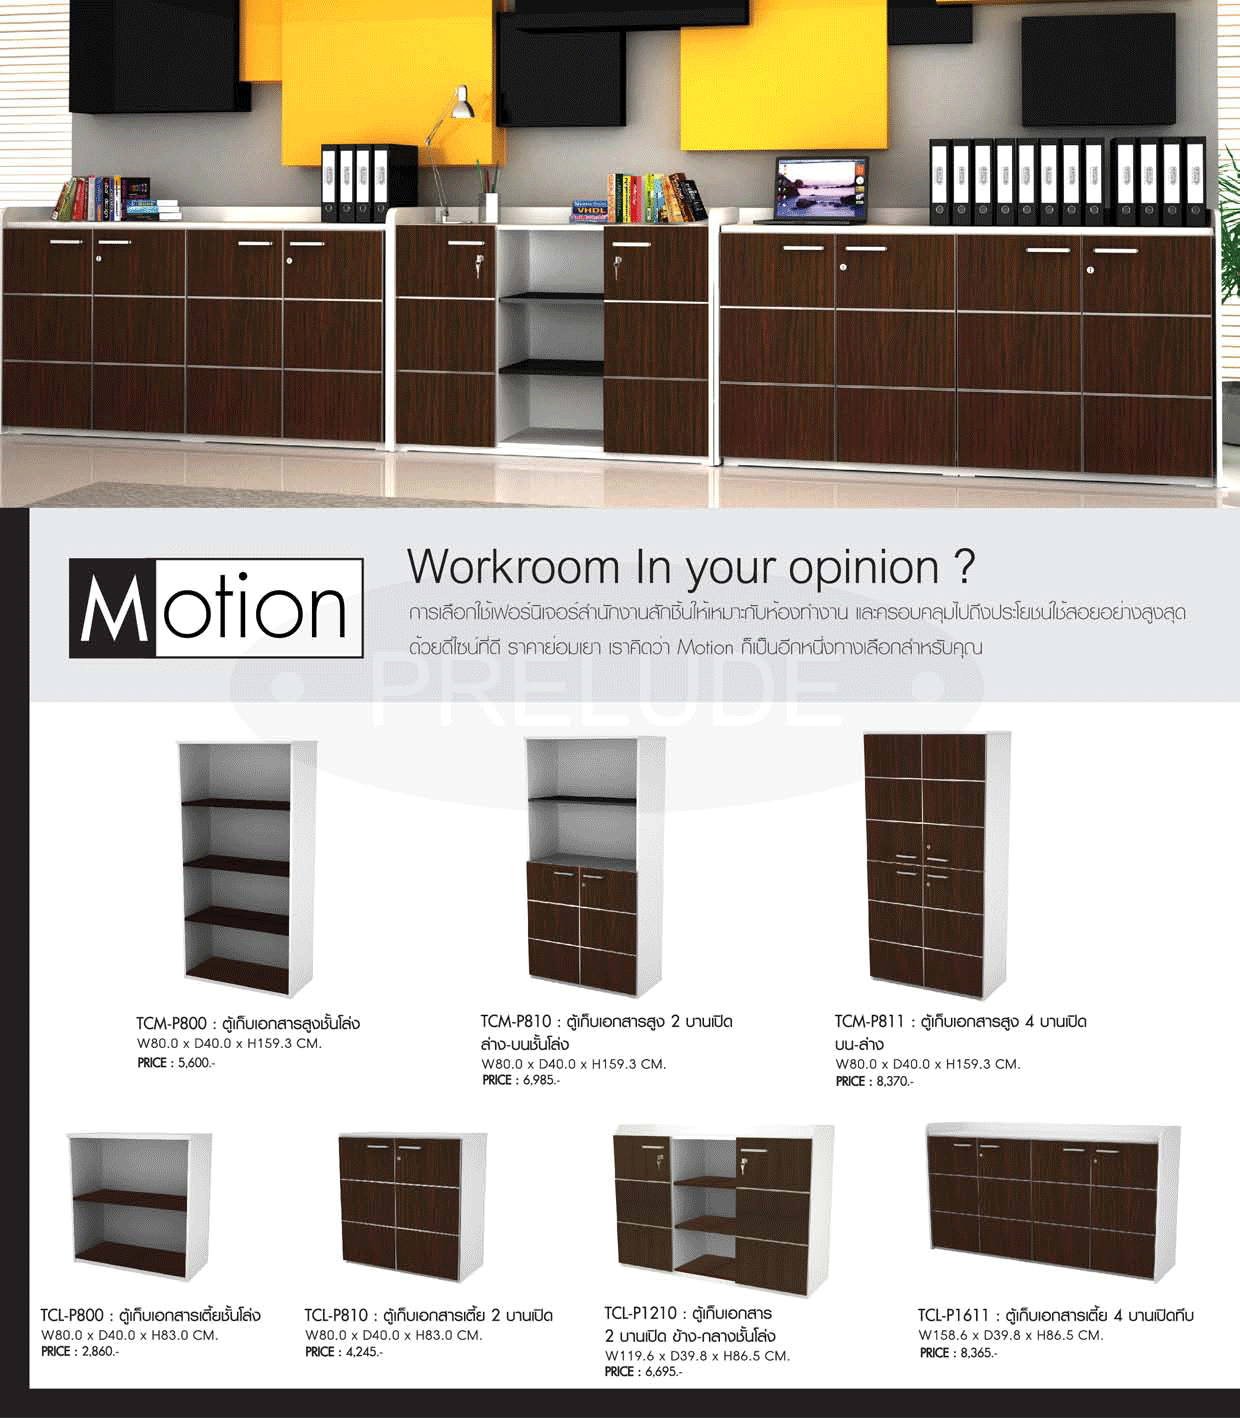 80087::TCM-P811::A Prelude cabinet with 2 double swing doors. Dimension (WxDxH) cm : 80x40x160